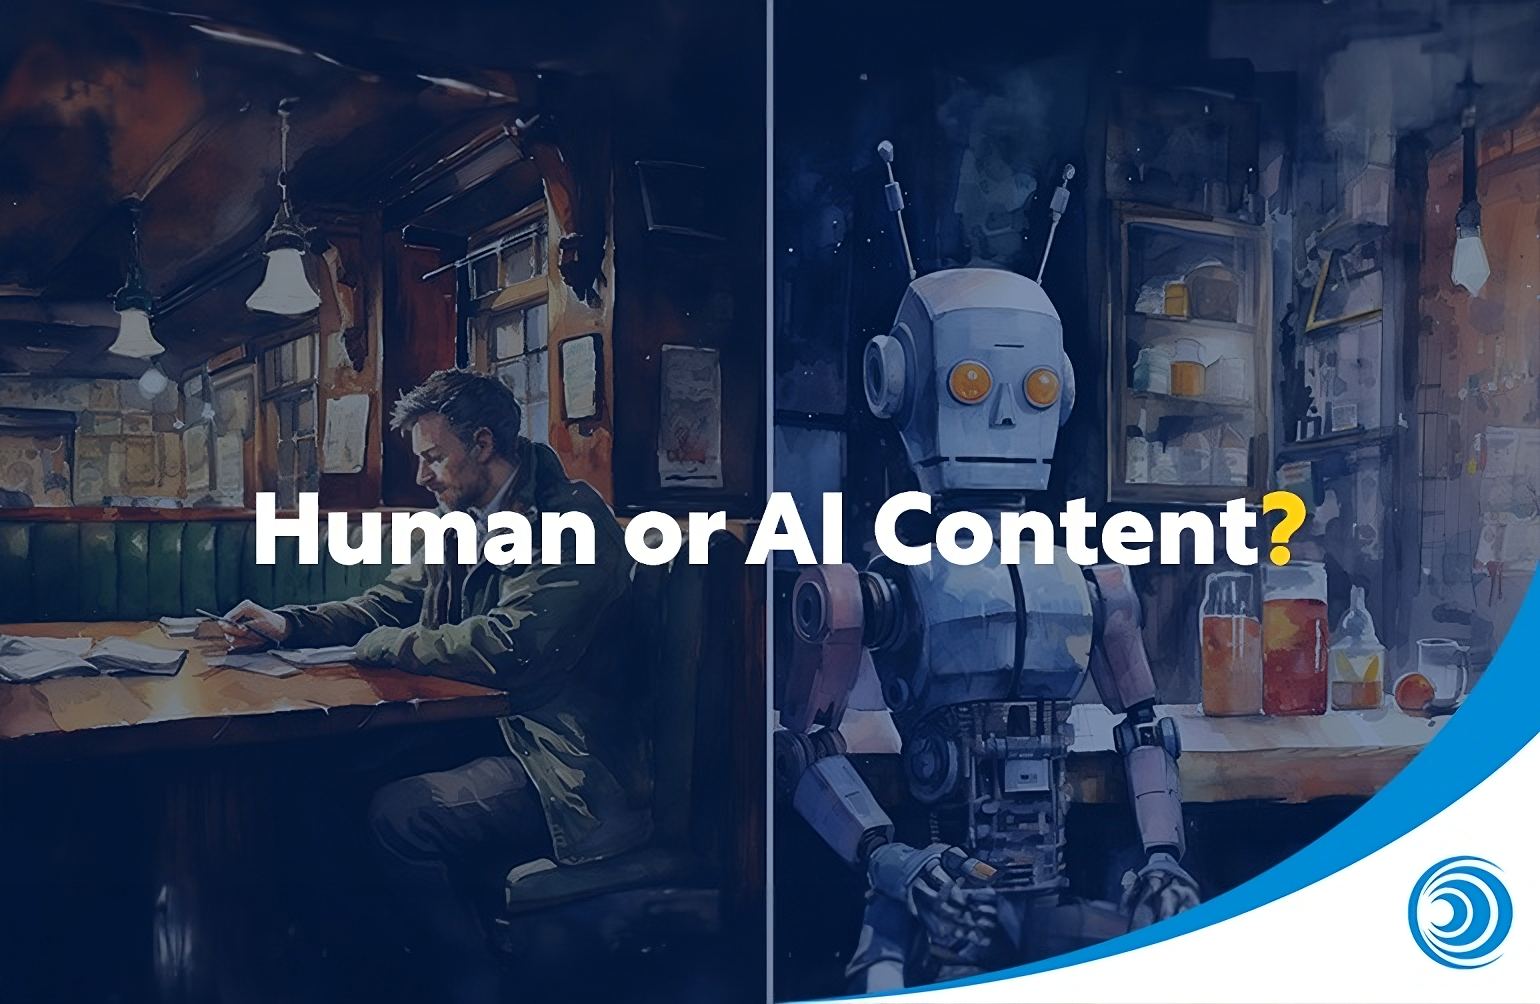 Be Bold or Beware: The Opportunities & Pitfalls for AI in Marketing